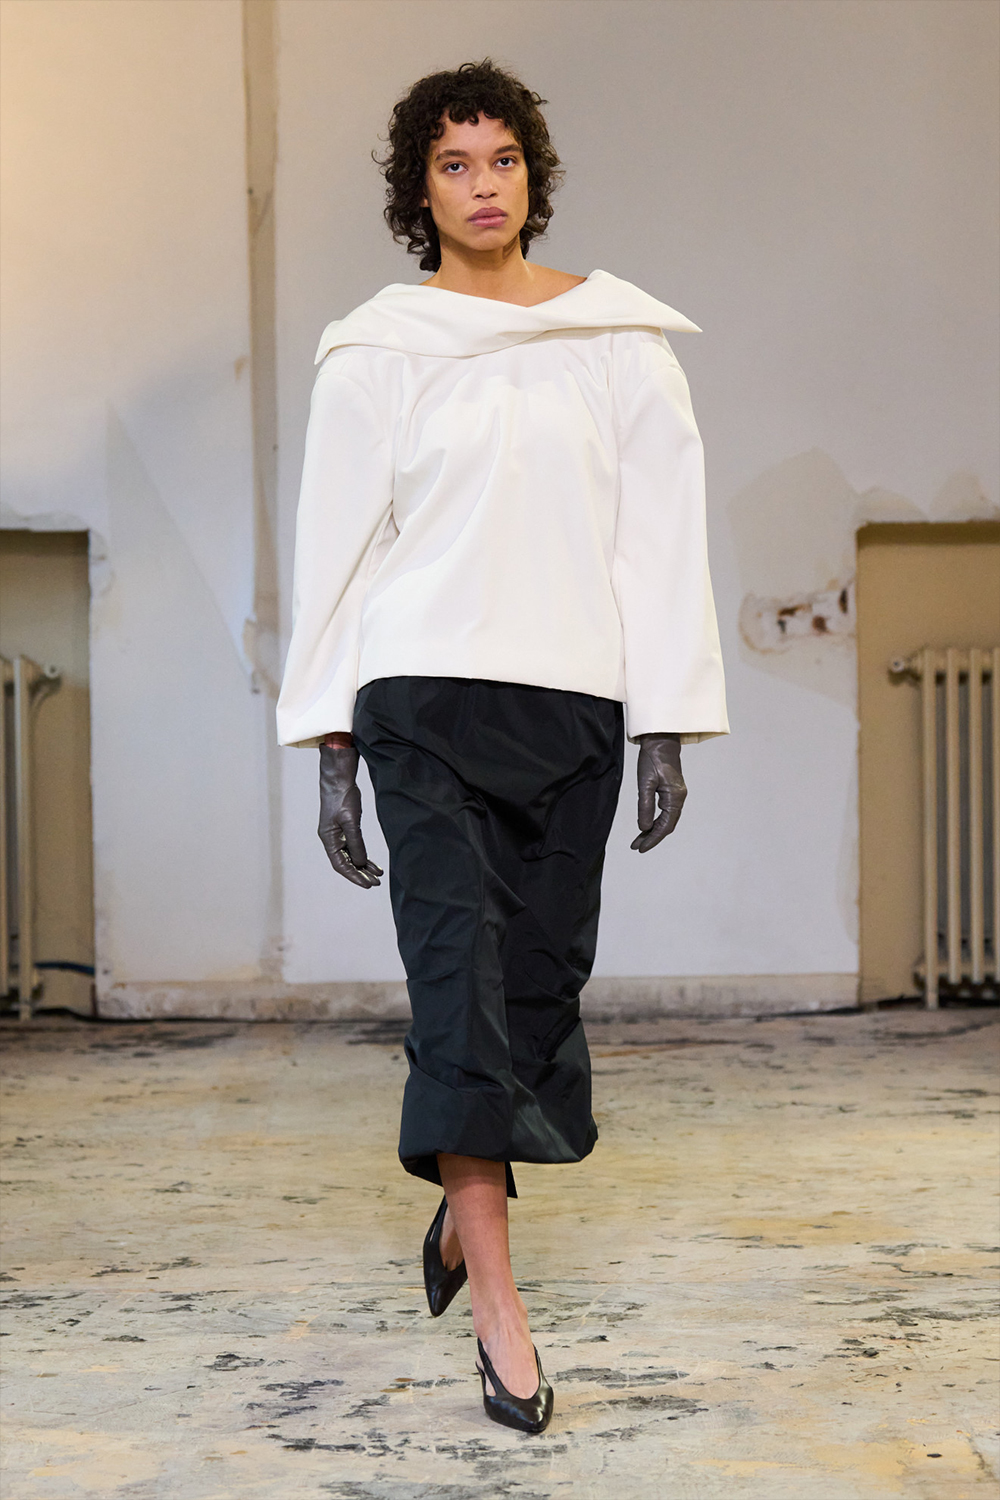 Swan fashion trends on the fall/winter 2024 runways